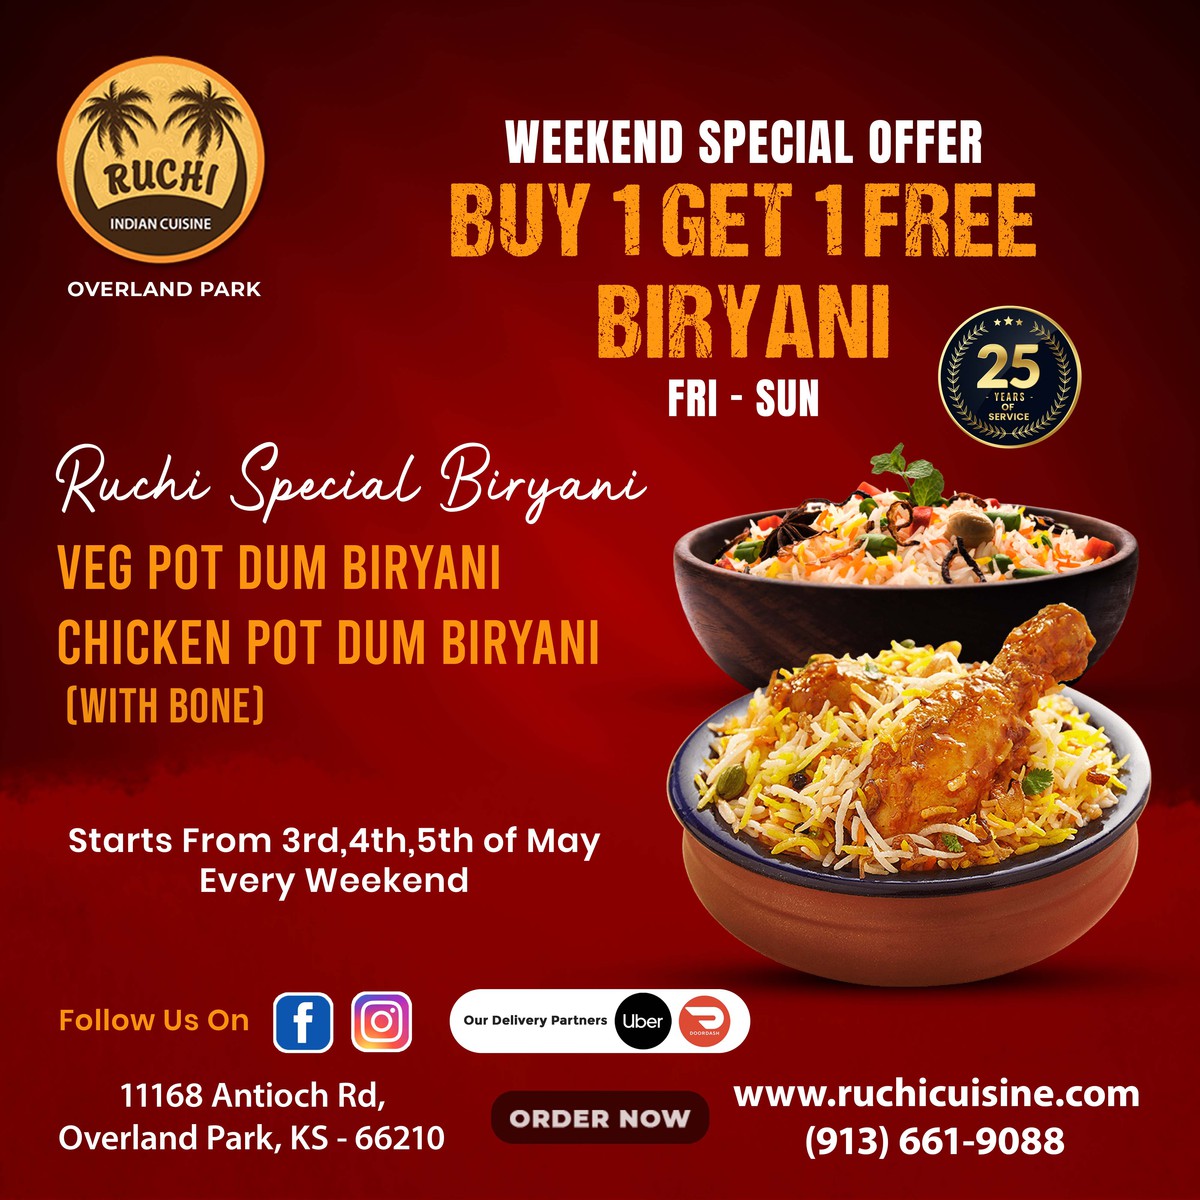 Weekend Special Offer